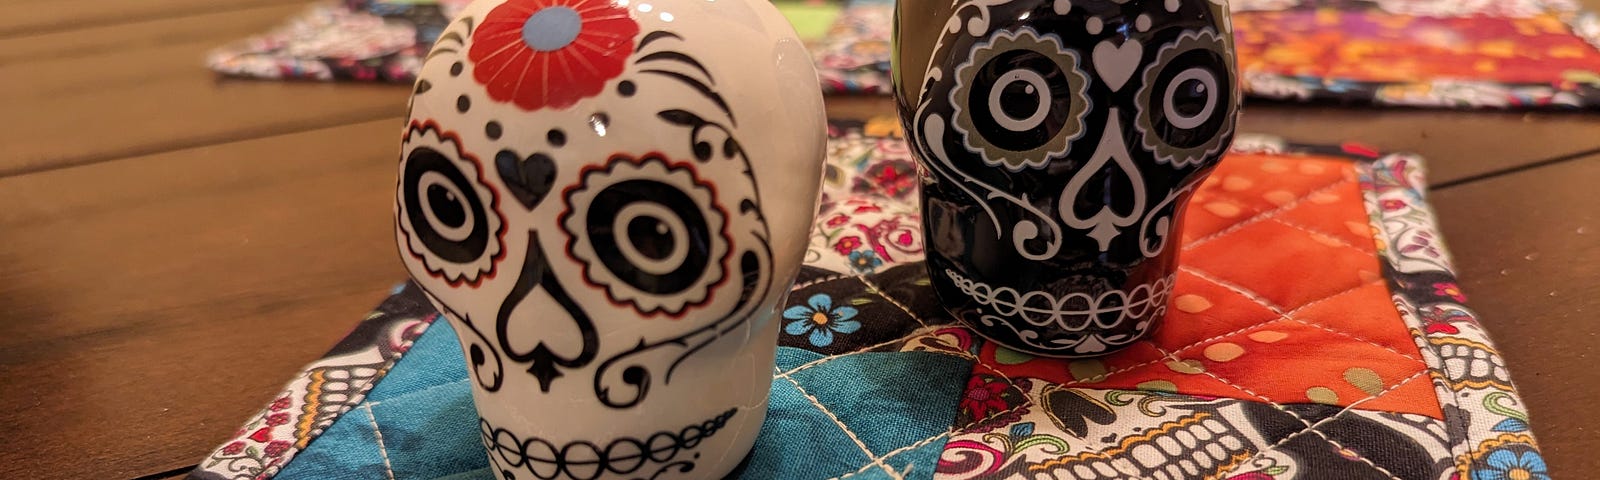 This shows sugar skull salt and pepper shakers.